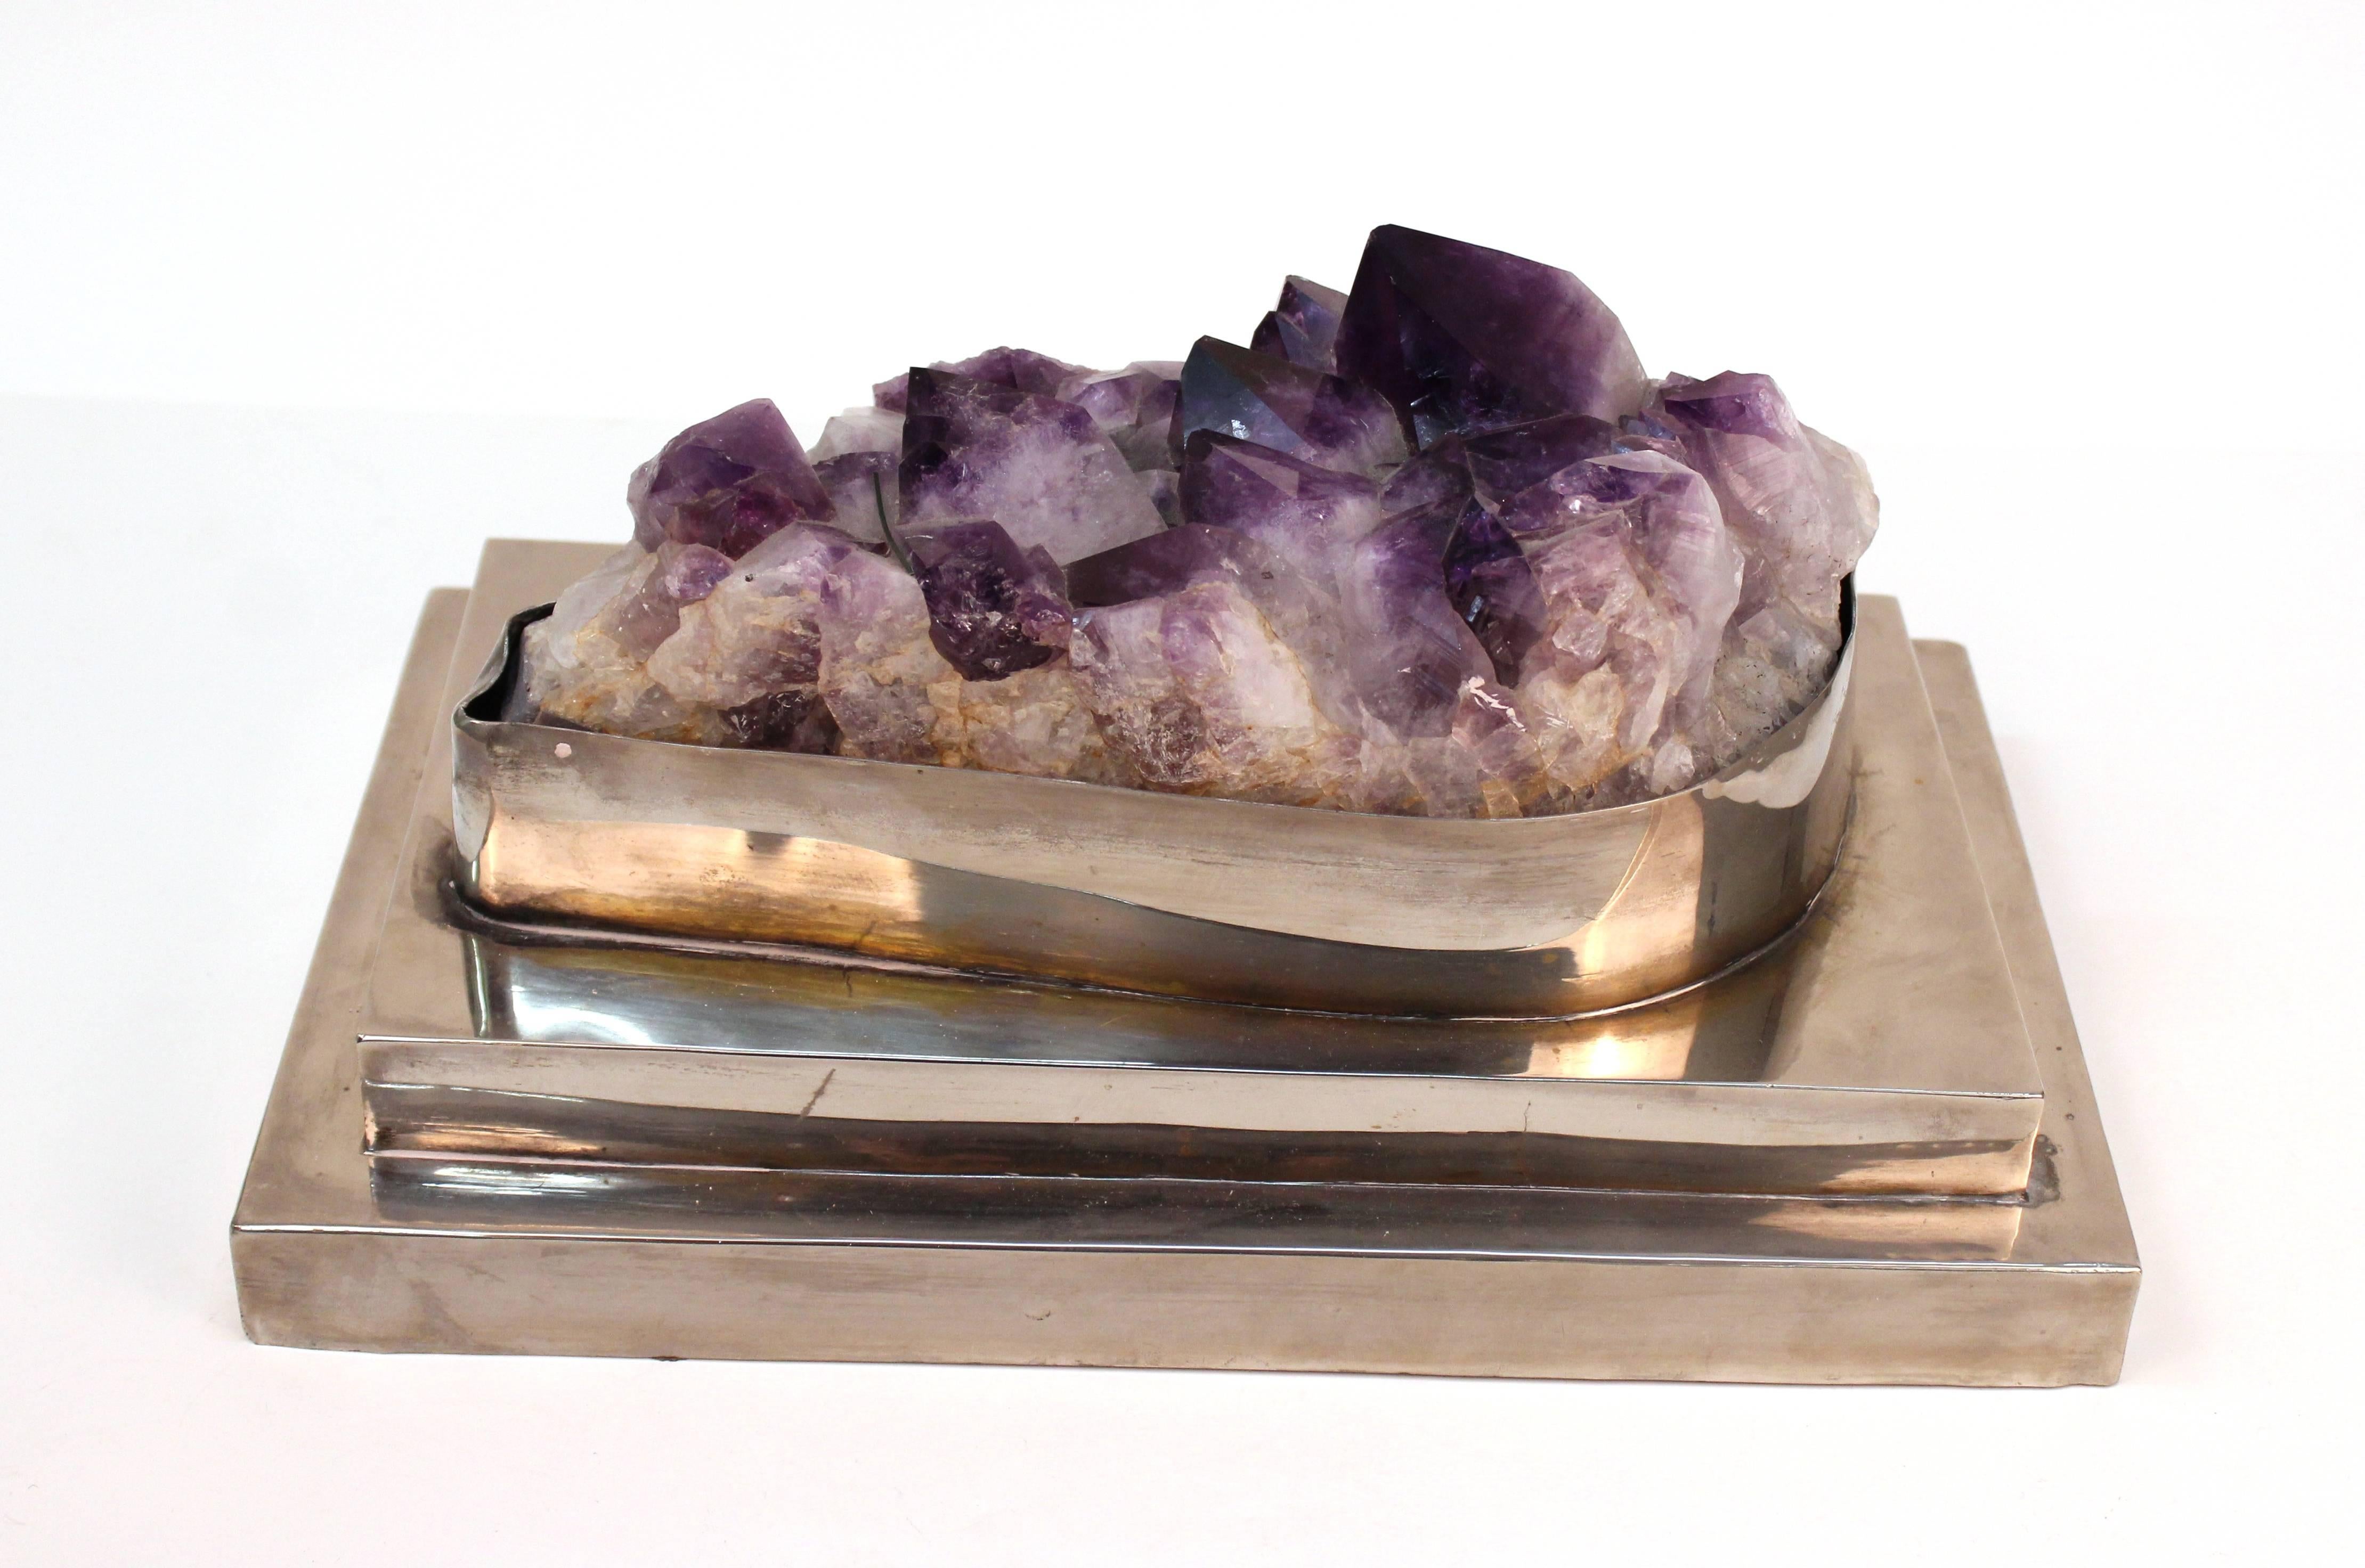 Decorative amethyst geode, mounted on a stepped base in silver plate, designed in the organic modern style. Very good condition, wear consistent with age and use.

110367.